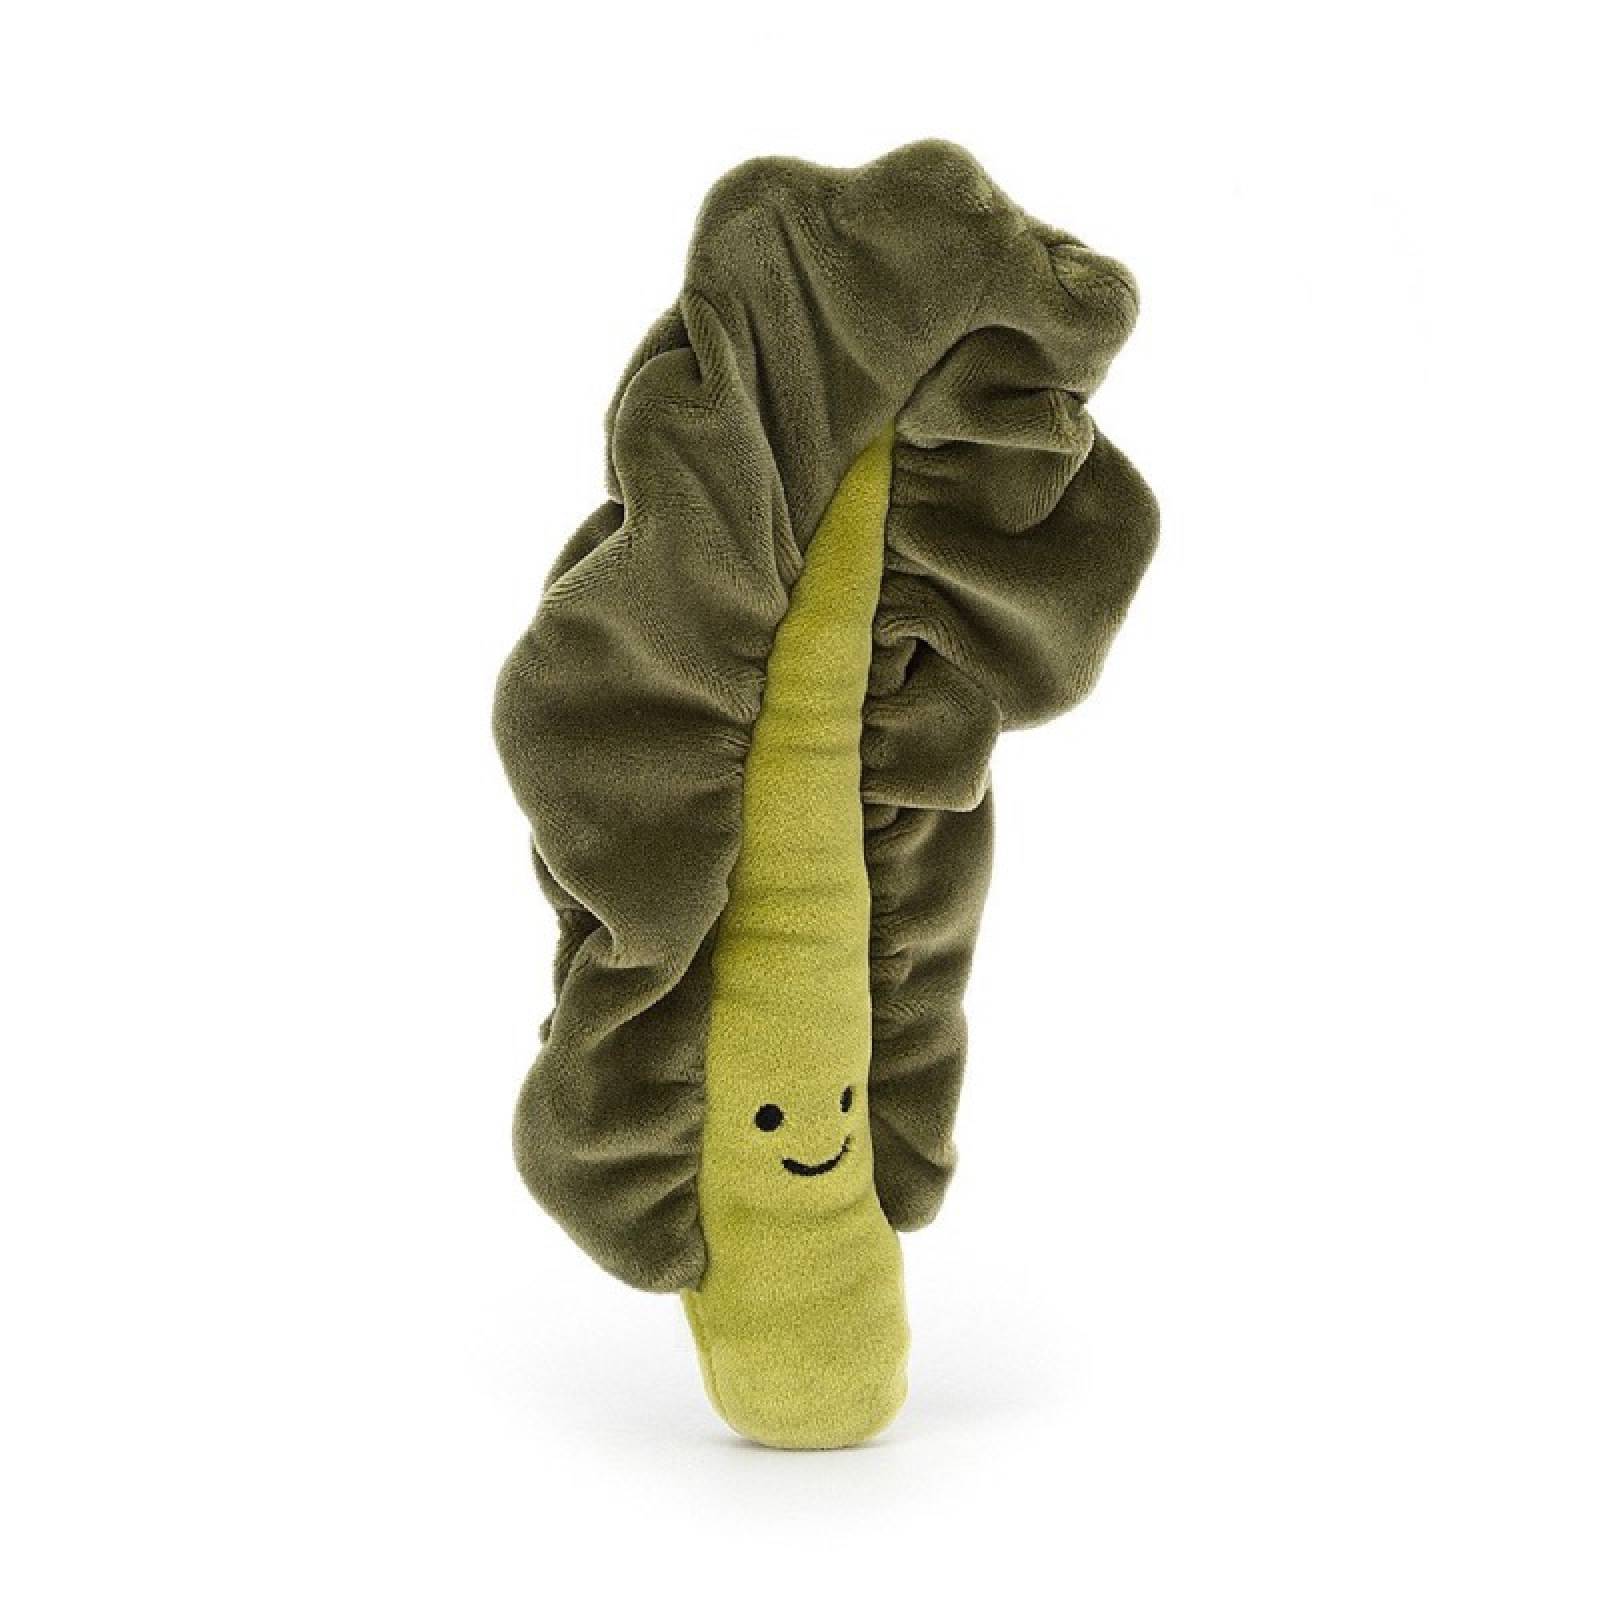 Vivacious Vegetable Kale Leaf Soft Toy By Jellycat